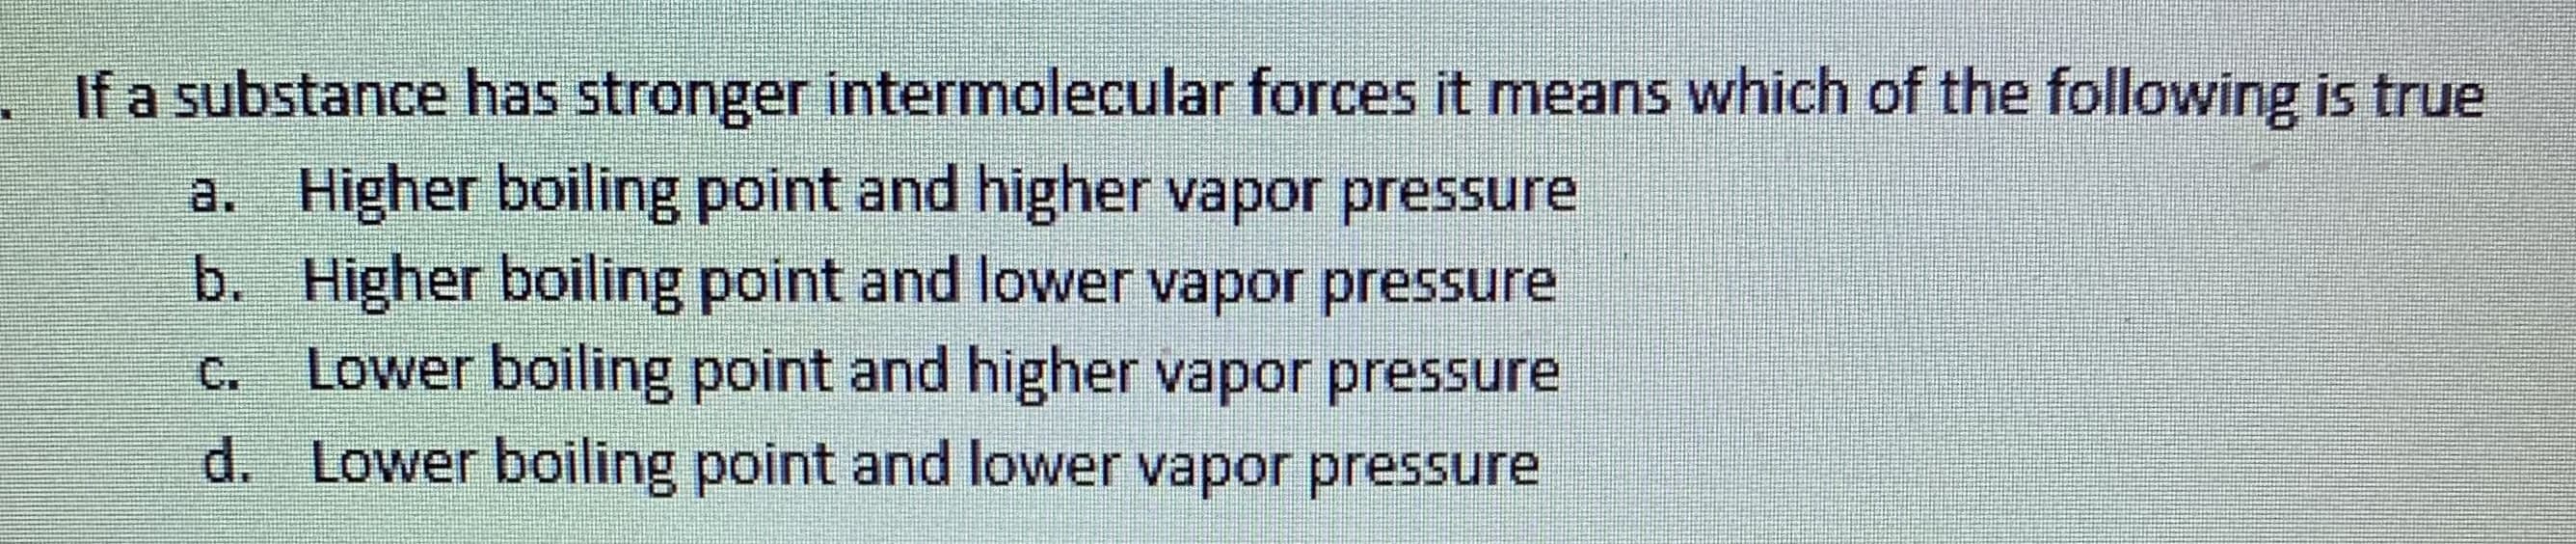 If a substance has stronger intermolecular forces it means which of the following is true
a. Higher boiling point and higher vapor pressure
b. Higher boiling point and lower vapor pressure
Lower boiling point and higher vapor pressure
d. Lower boiling point and lower vapor pressure
C.
